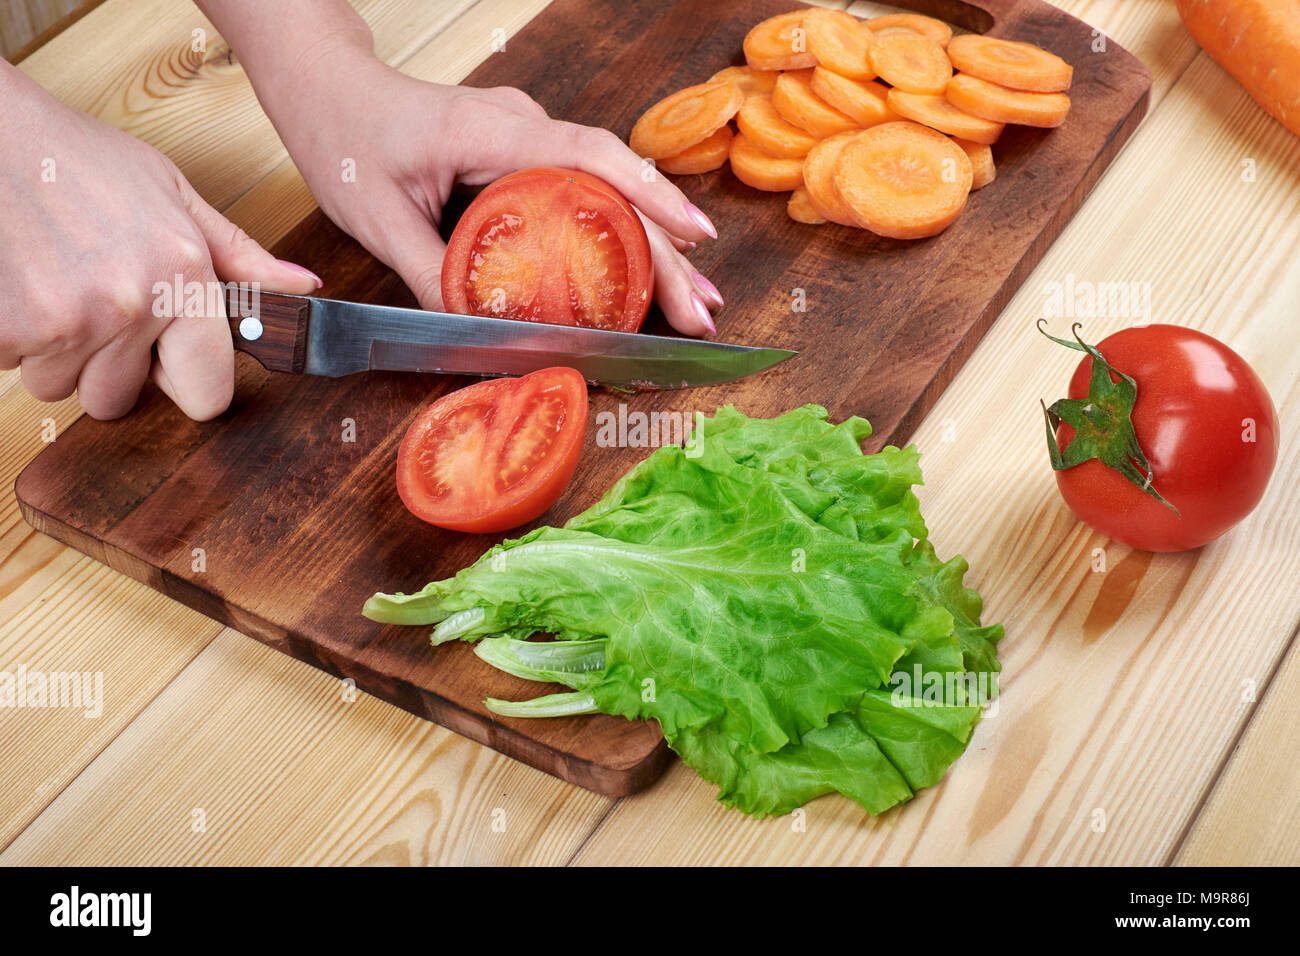 close up of female hand cutting tomato on cutting board at home, cooking, food and home concept Stock Photo